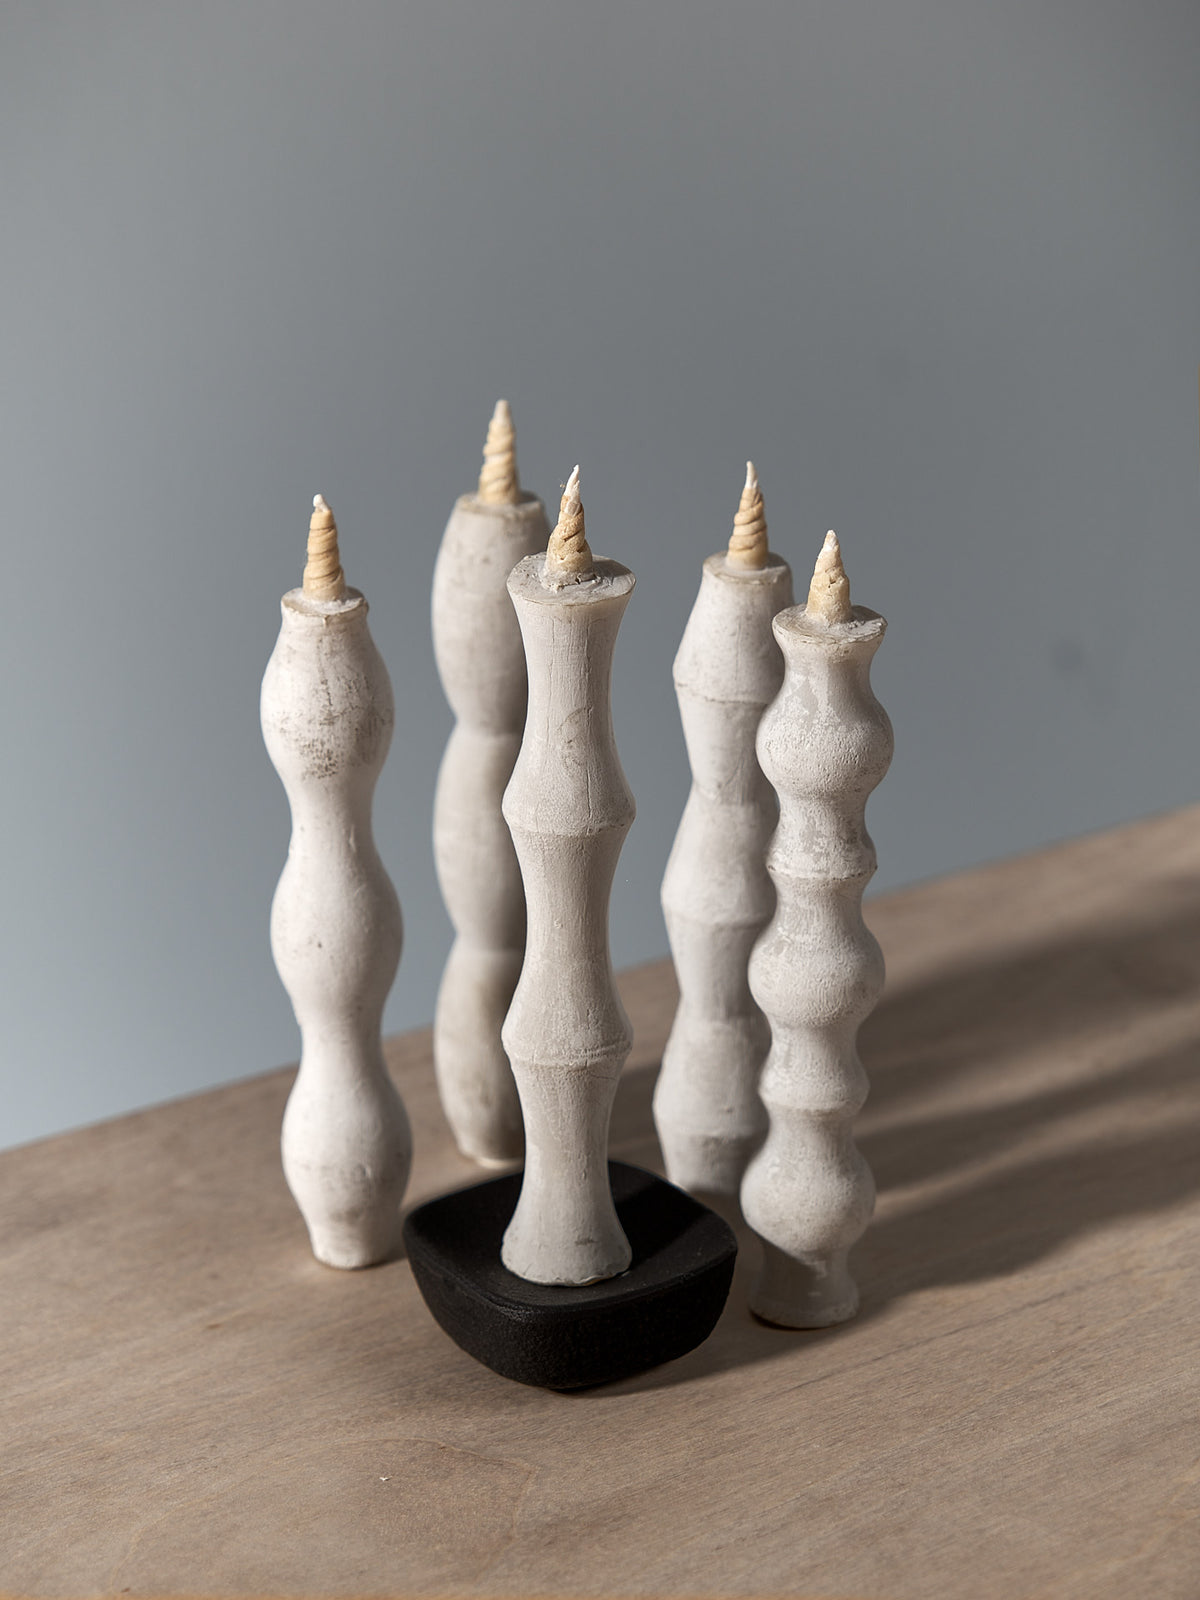 Four NANAO-N white candle holders on a wooden table. (Brand: Takazawa)